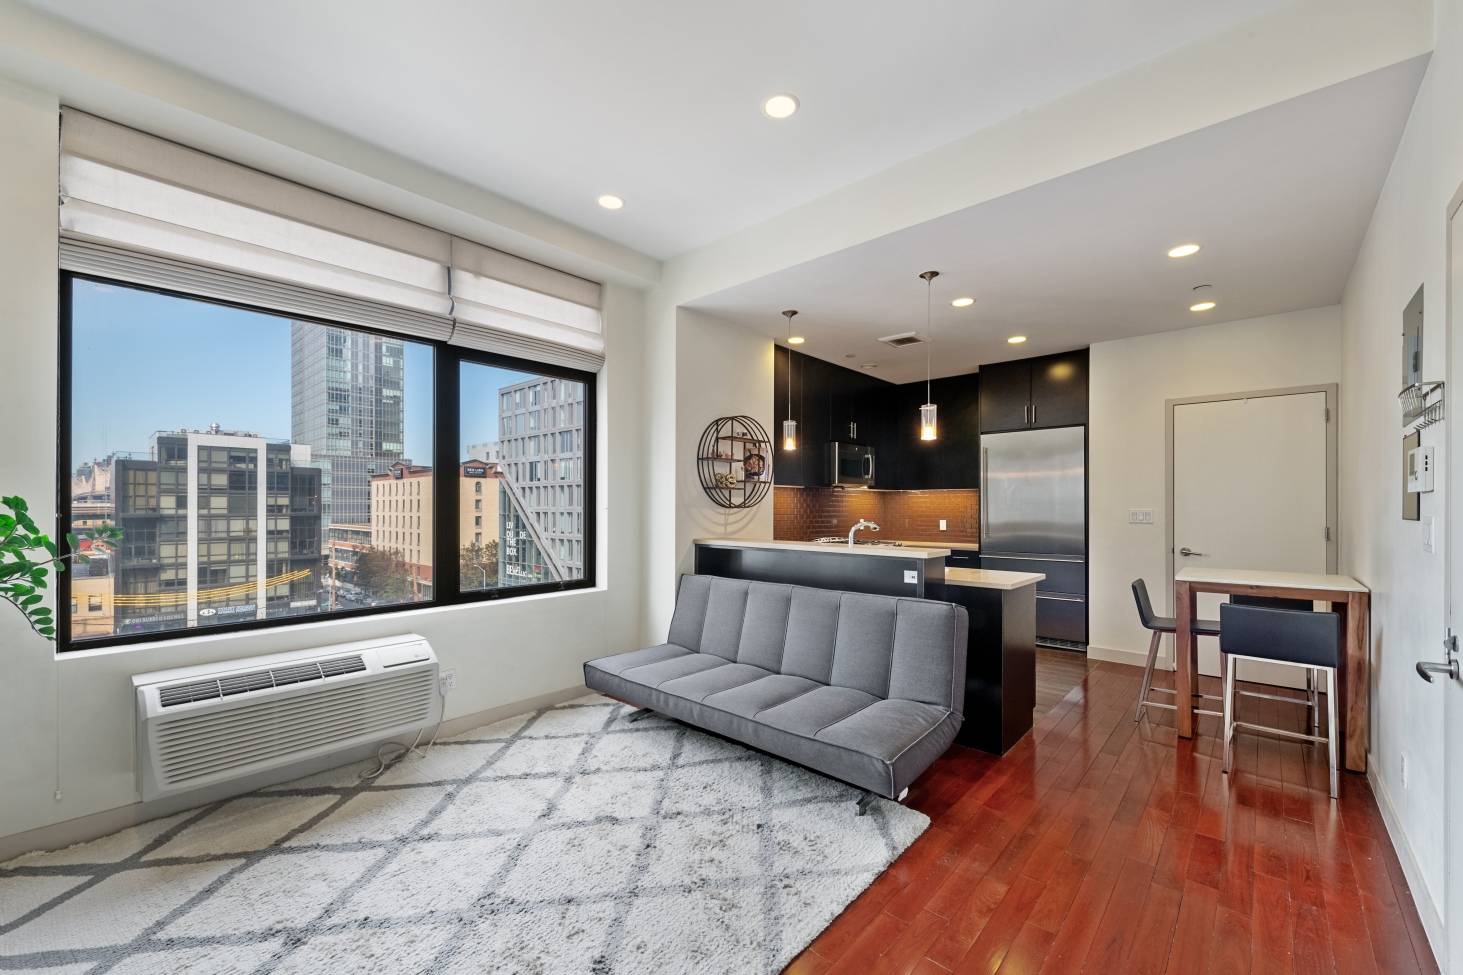 42 37 27th Street, 5C, is a large modern one bedroom home with high ceilings, abundant closet space including a huge walk in closet in the bedroom, stainless steel appliances, ...